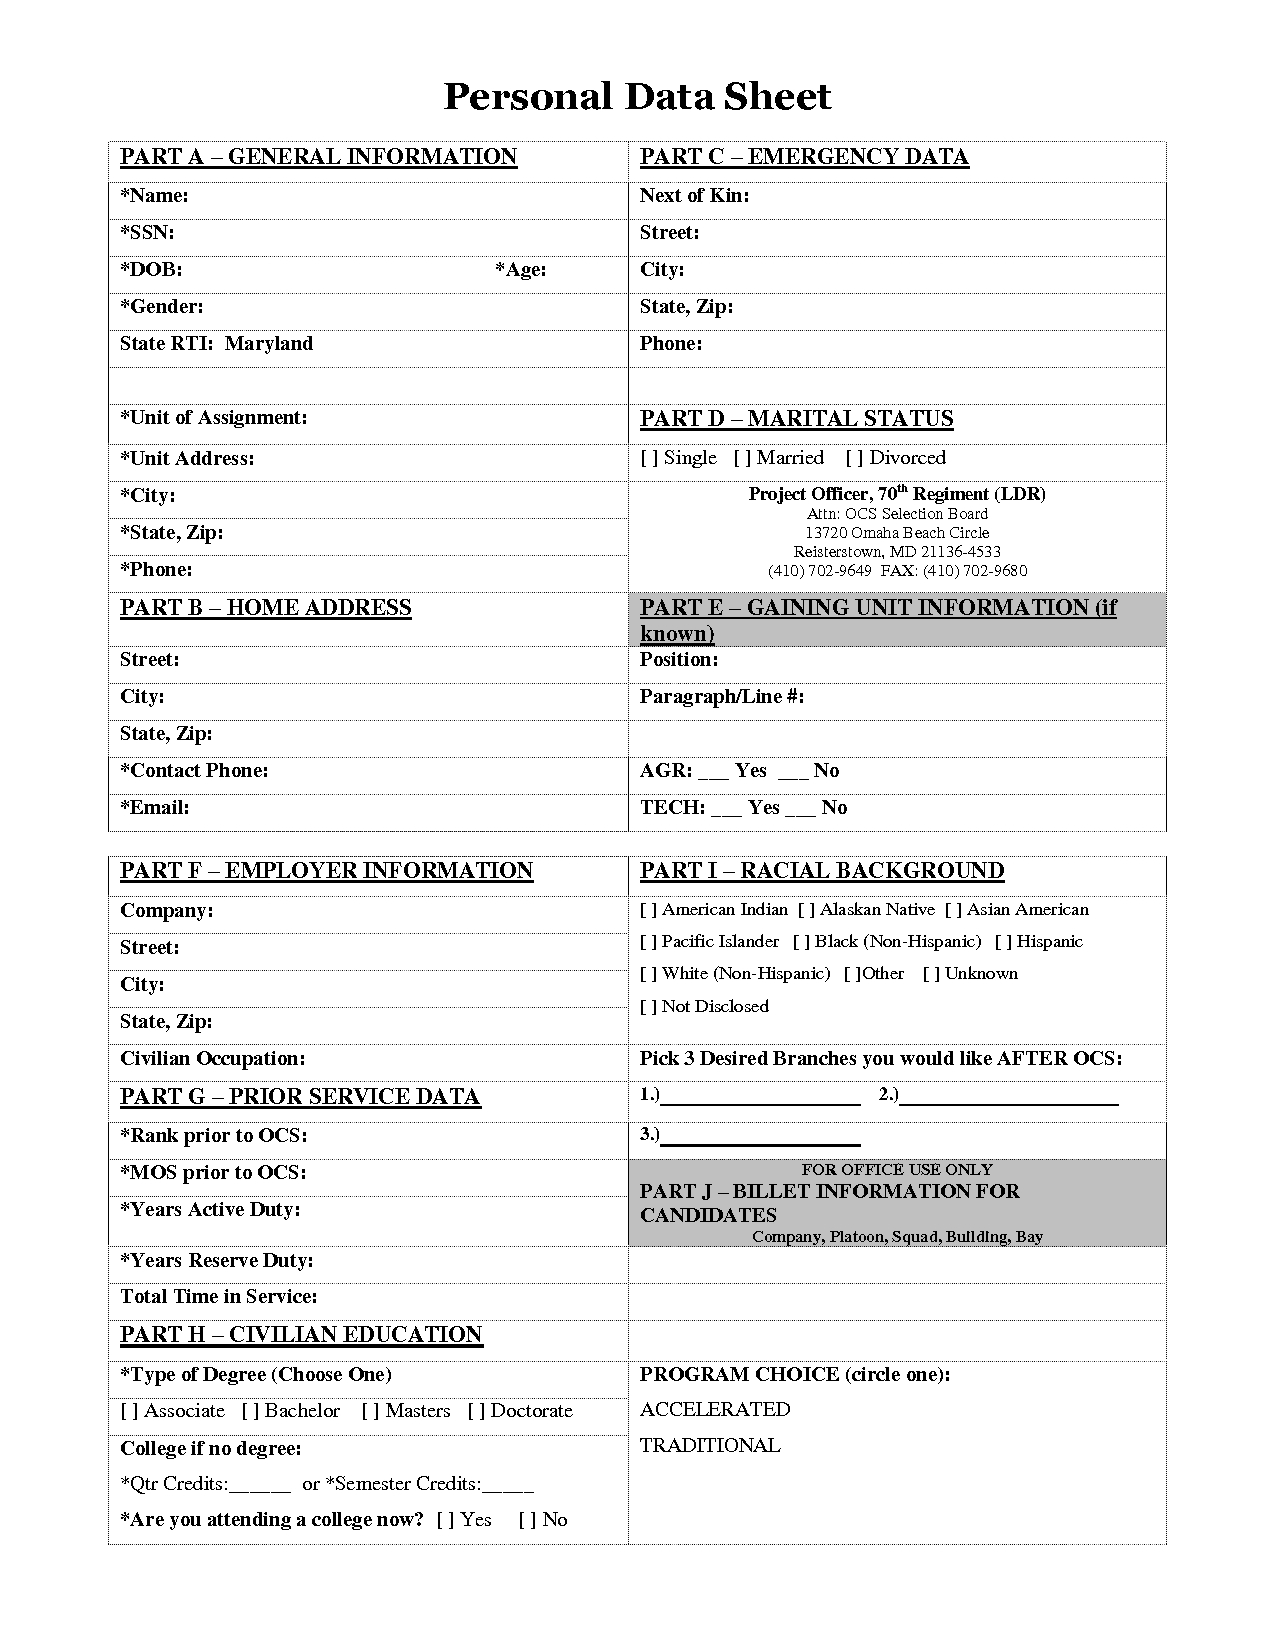 Personal Data Sheet Form Images - Personal Information Sheet | Legal - Free Printable Data Sheets